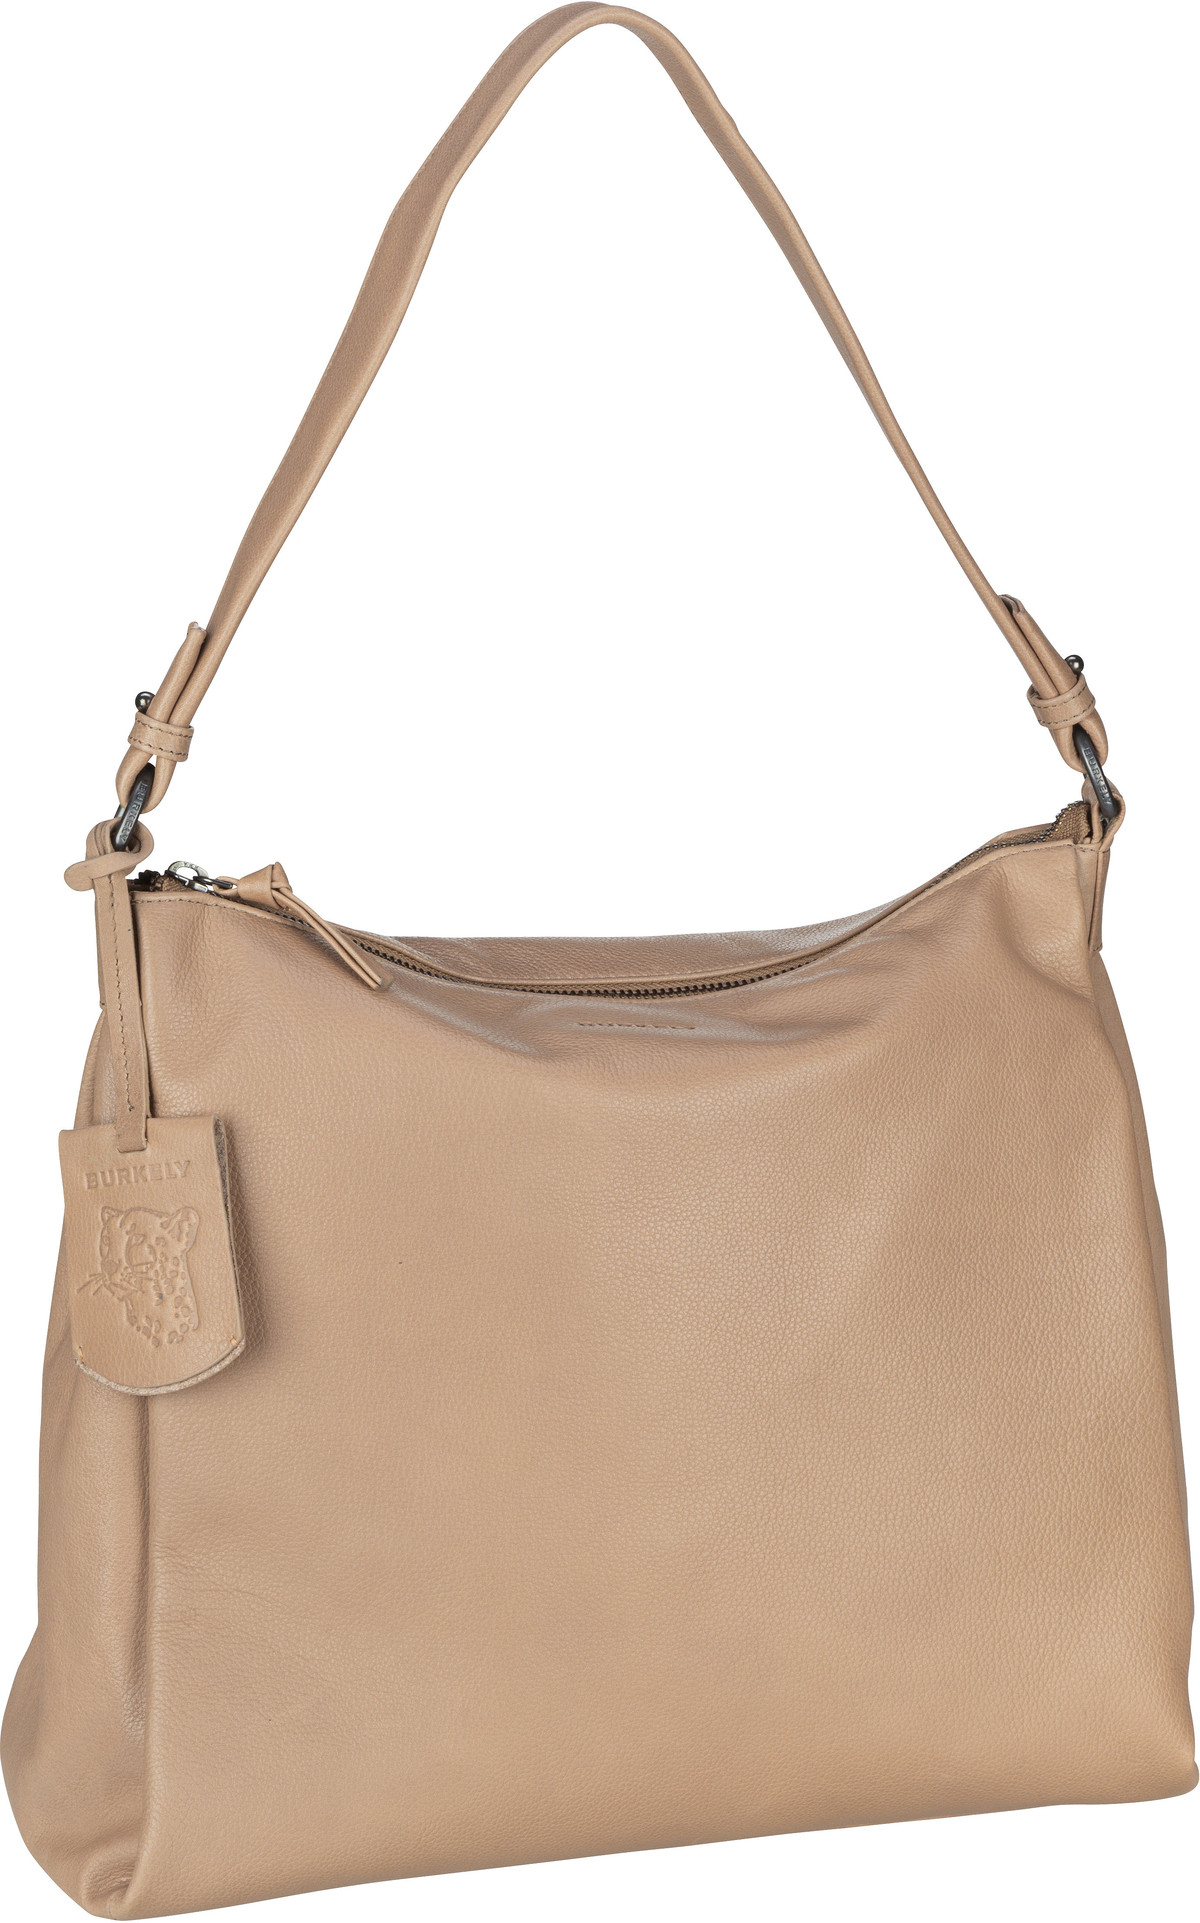 Burkely Just Jolie Hobo - Taupe